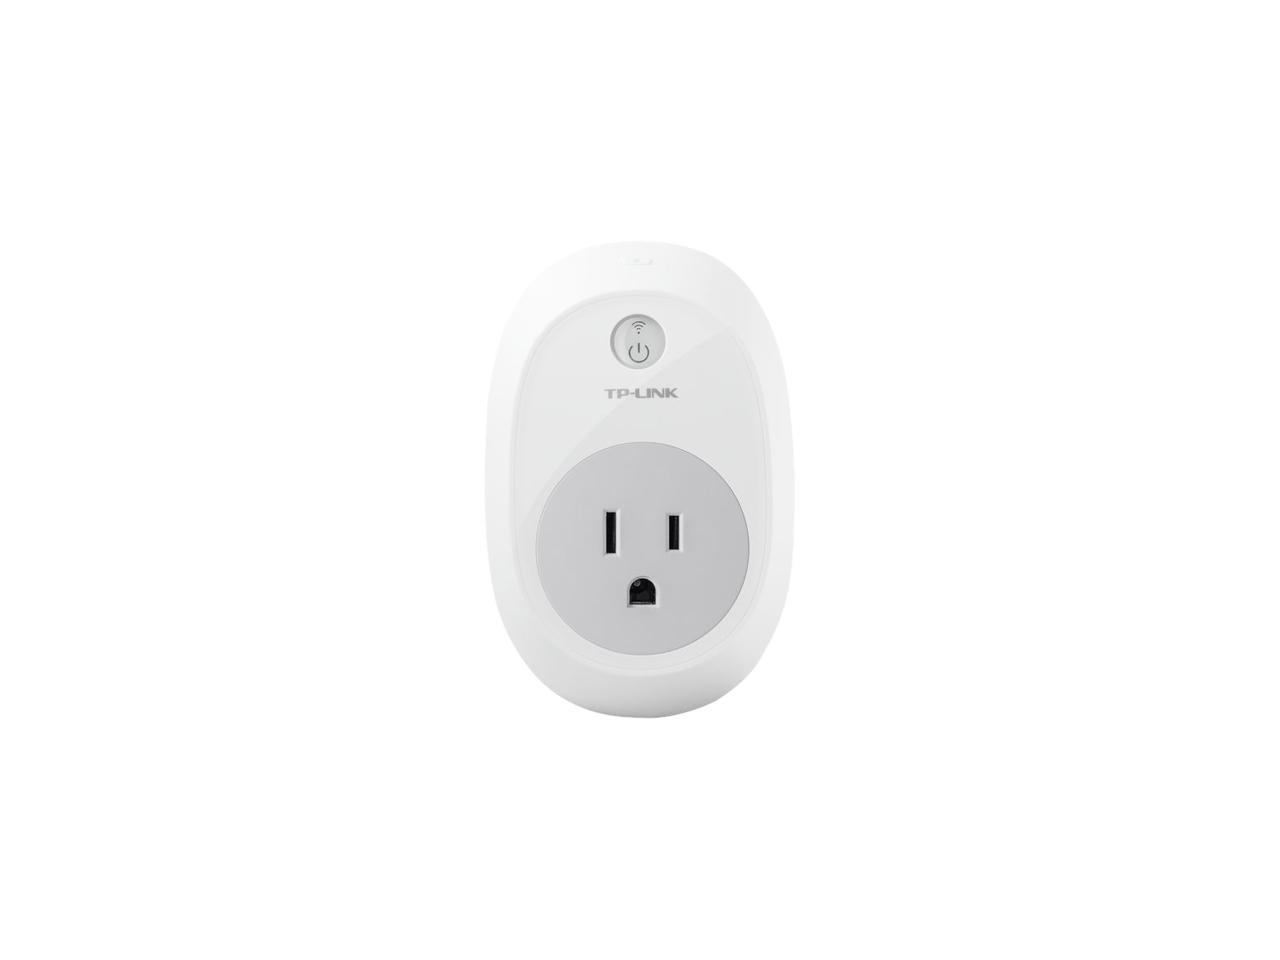 TP-LINK Kasa HS100 Smart Plug, Wi-Fi Enabled, Control Your Electronics from Anywhere, Energy Saving, Compatible with Google Home and Amazon Echo Alexa